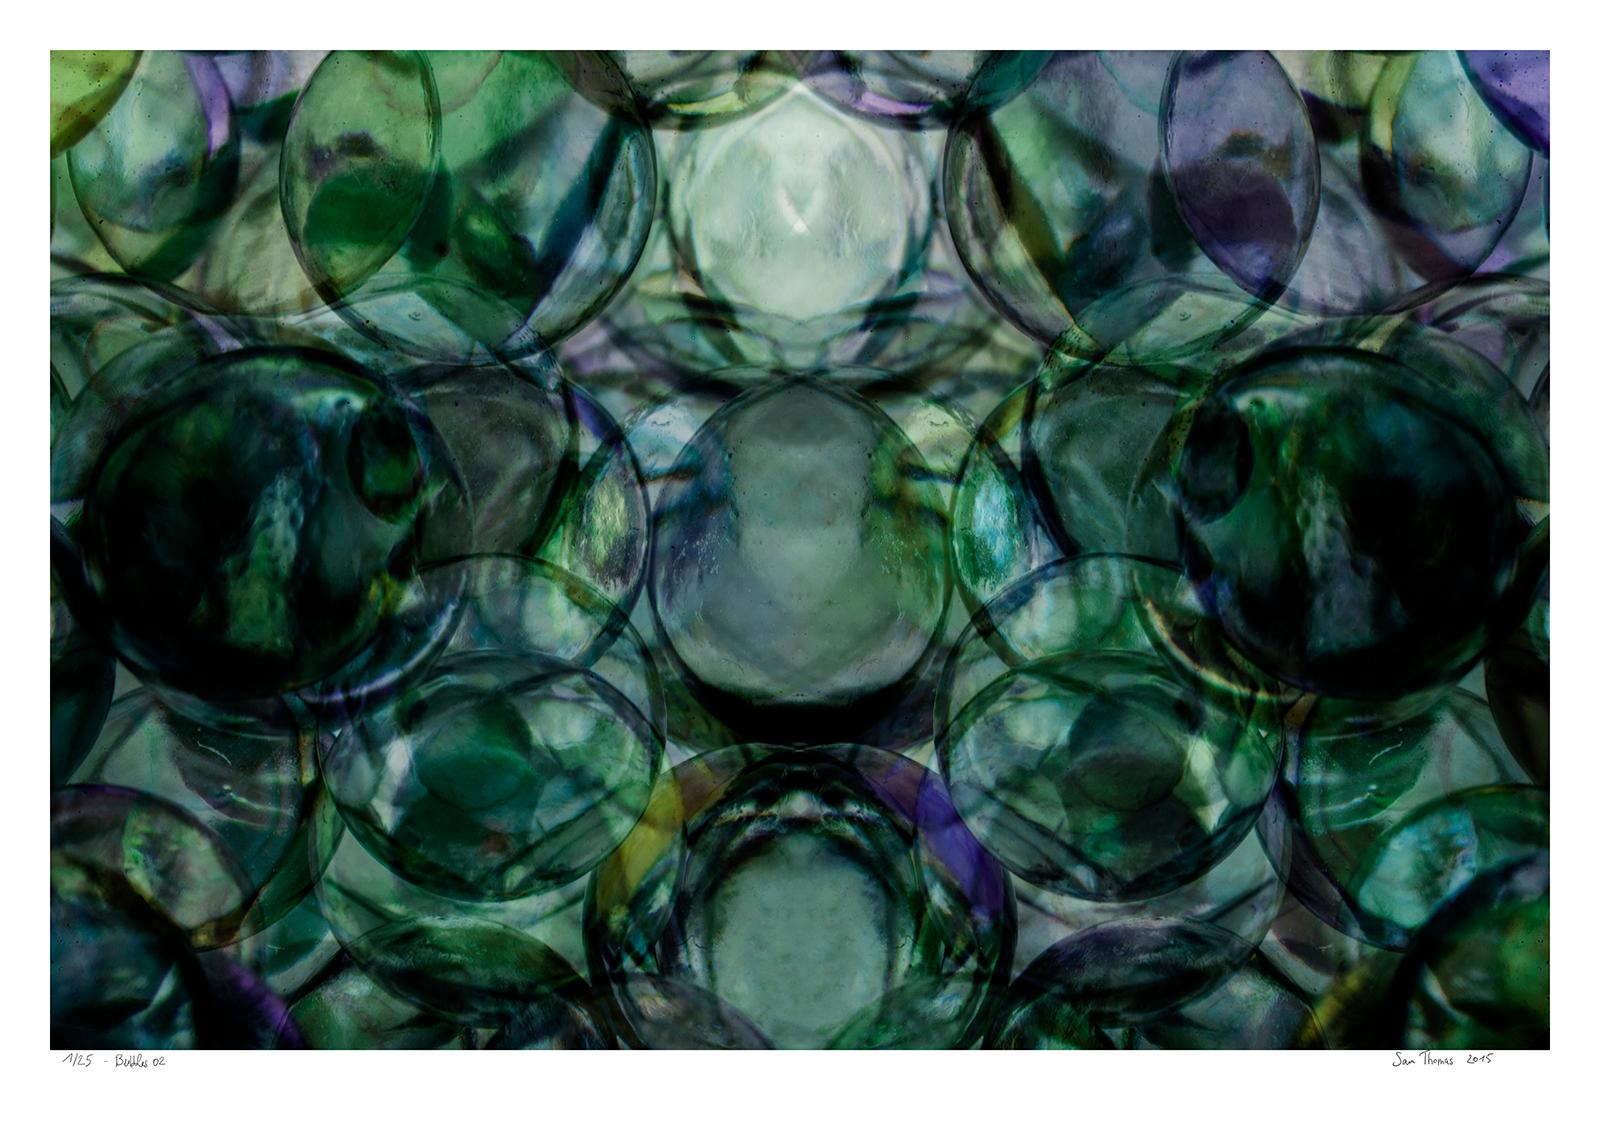 Sam Thomas Abstract Photograph - Bubbles 02 - Abstract color photograph, Limited edition print, Purple green